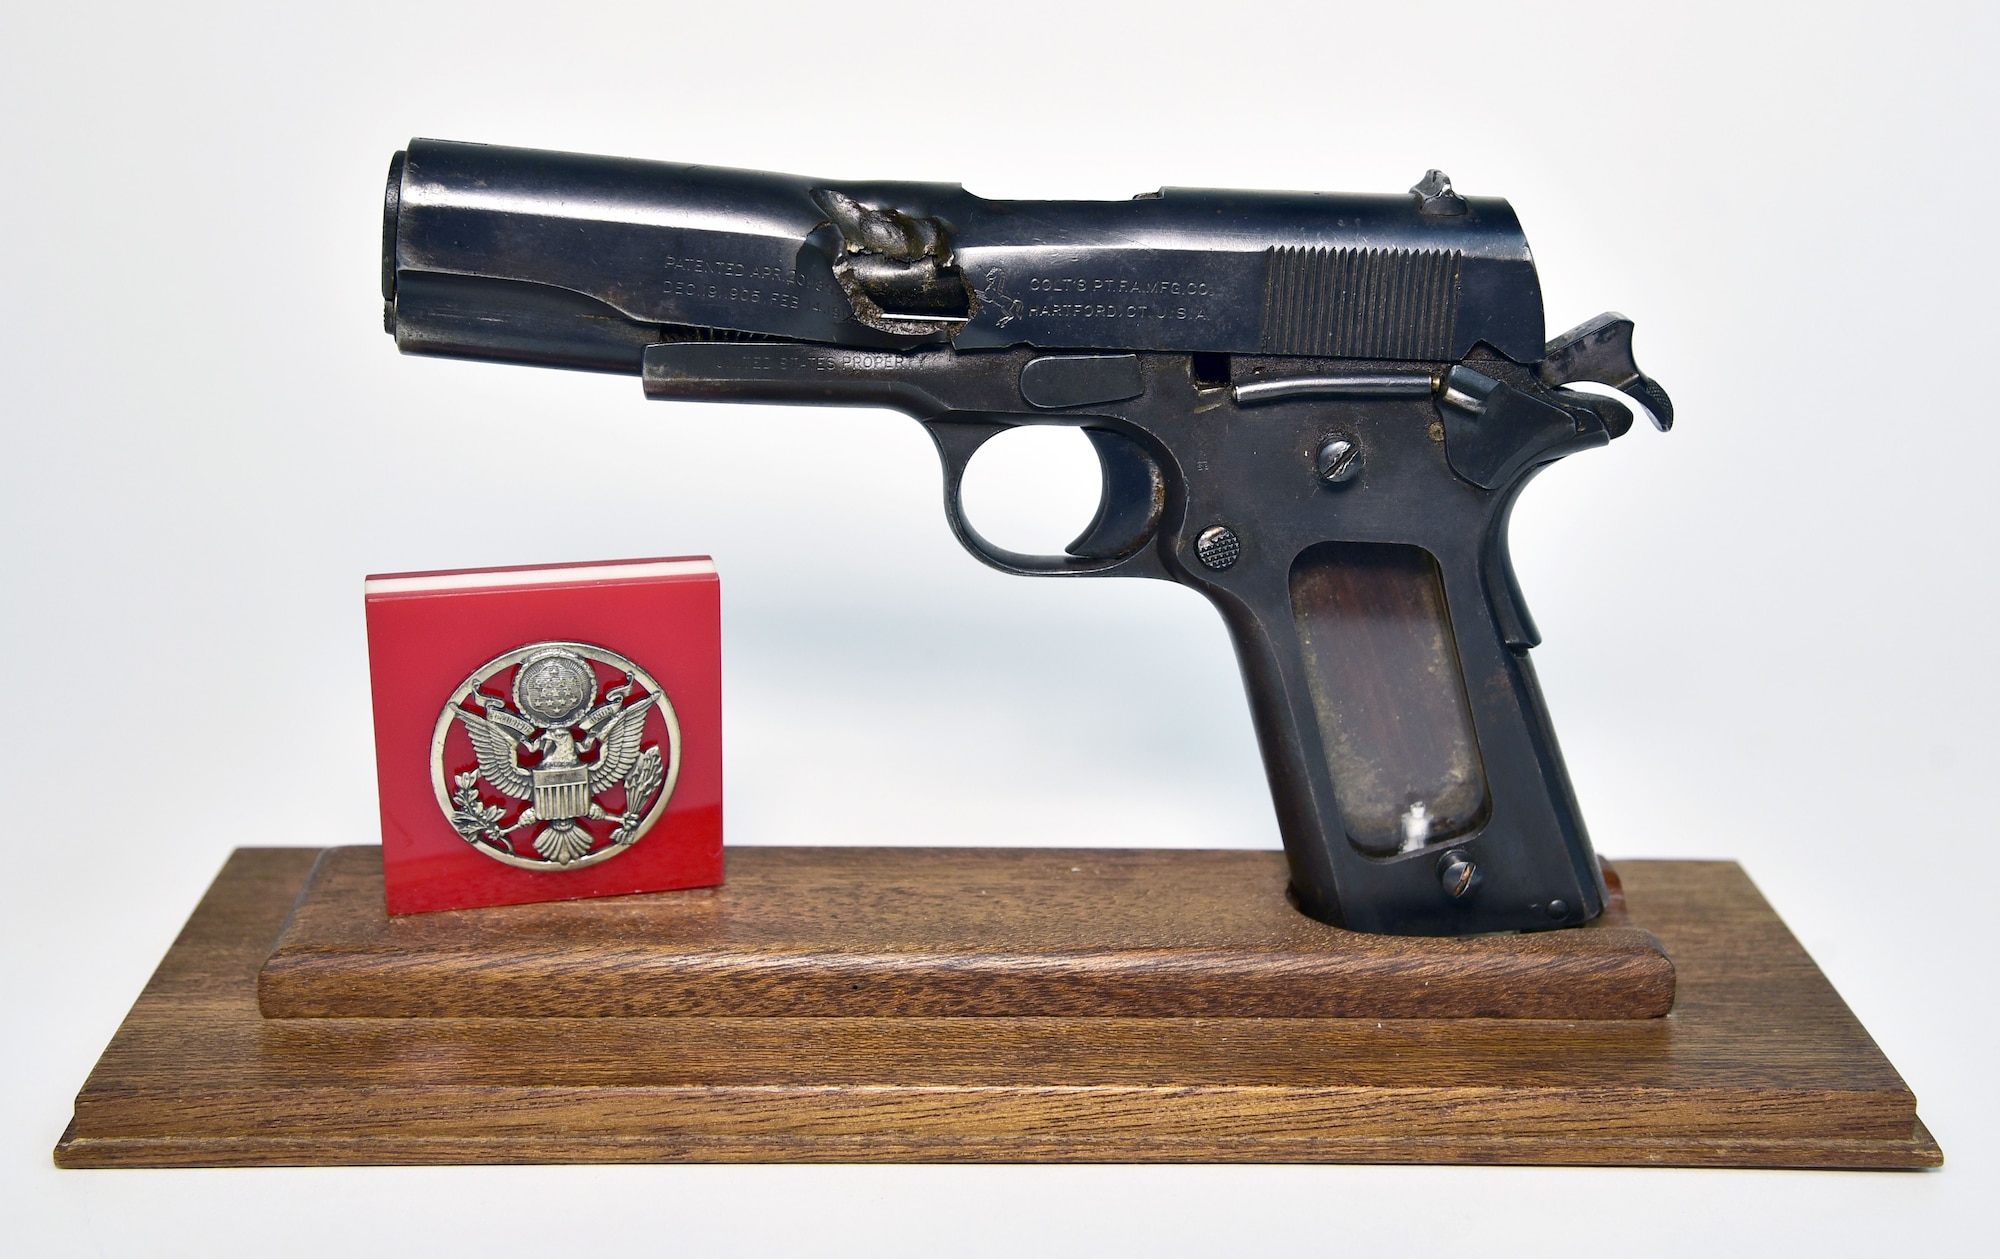 Plans call for this artifact to be displayed near the B-17F Memphis Belle™ as part of the new strategic bombardment exhibit in the WWII Gallery, which opens to the public on May 17, 2018. Flak-damaged M1911 .45-cal pistol and cap badge worn by Sgt Roy Zeran, 97th Bomb Group, when his B-17 was shot down on November 20, 1942. (The cap badge is post-World War II).